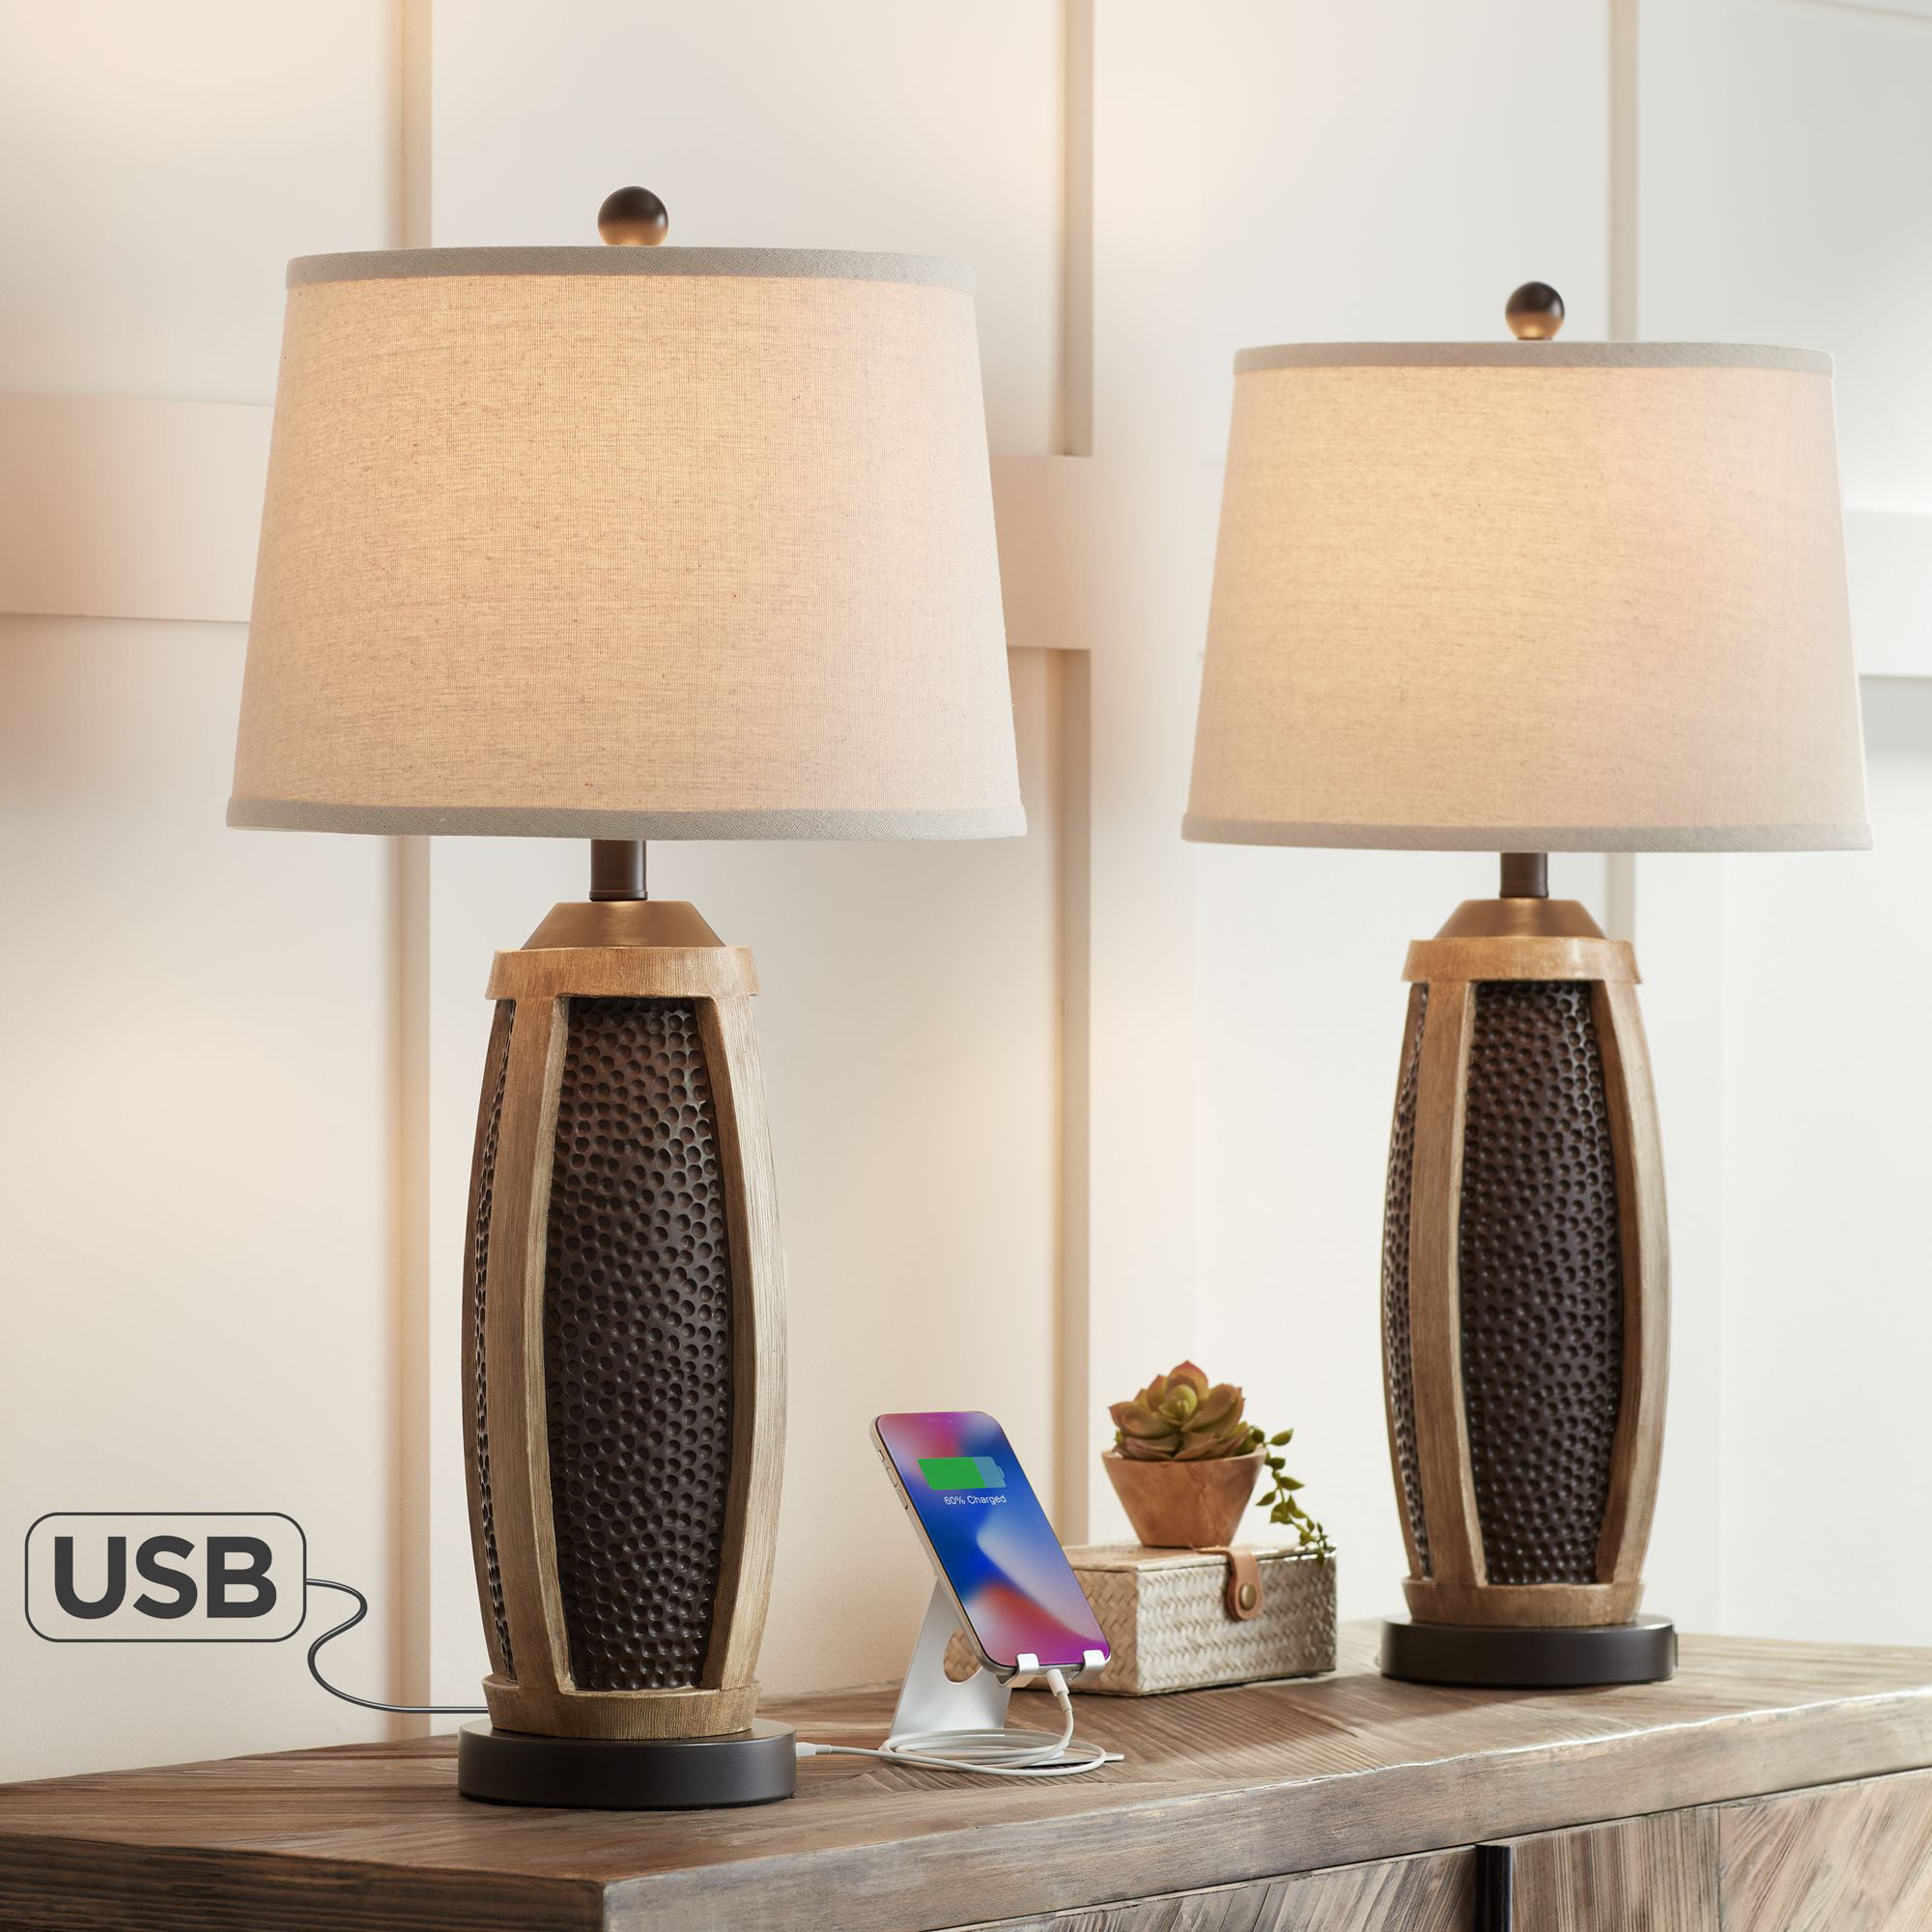 Bedside Lamp, 3 Way Dimmable Touch Control Table Lamp with 2 USB 